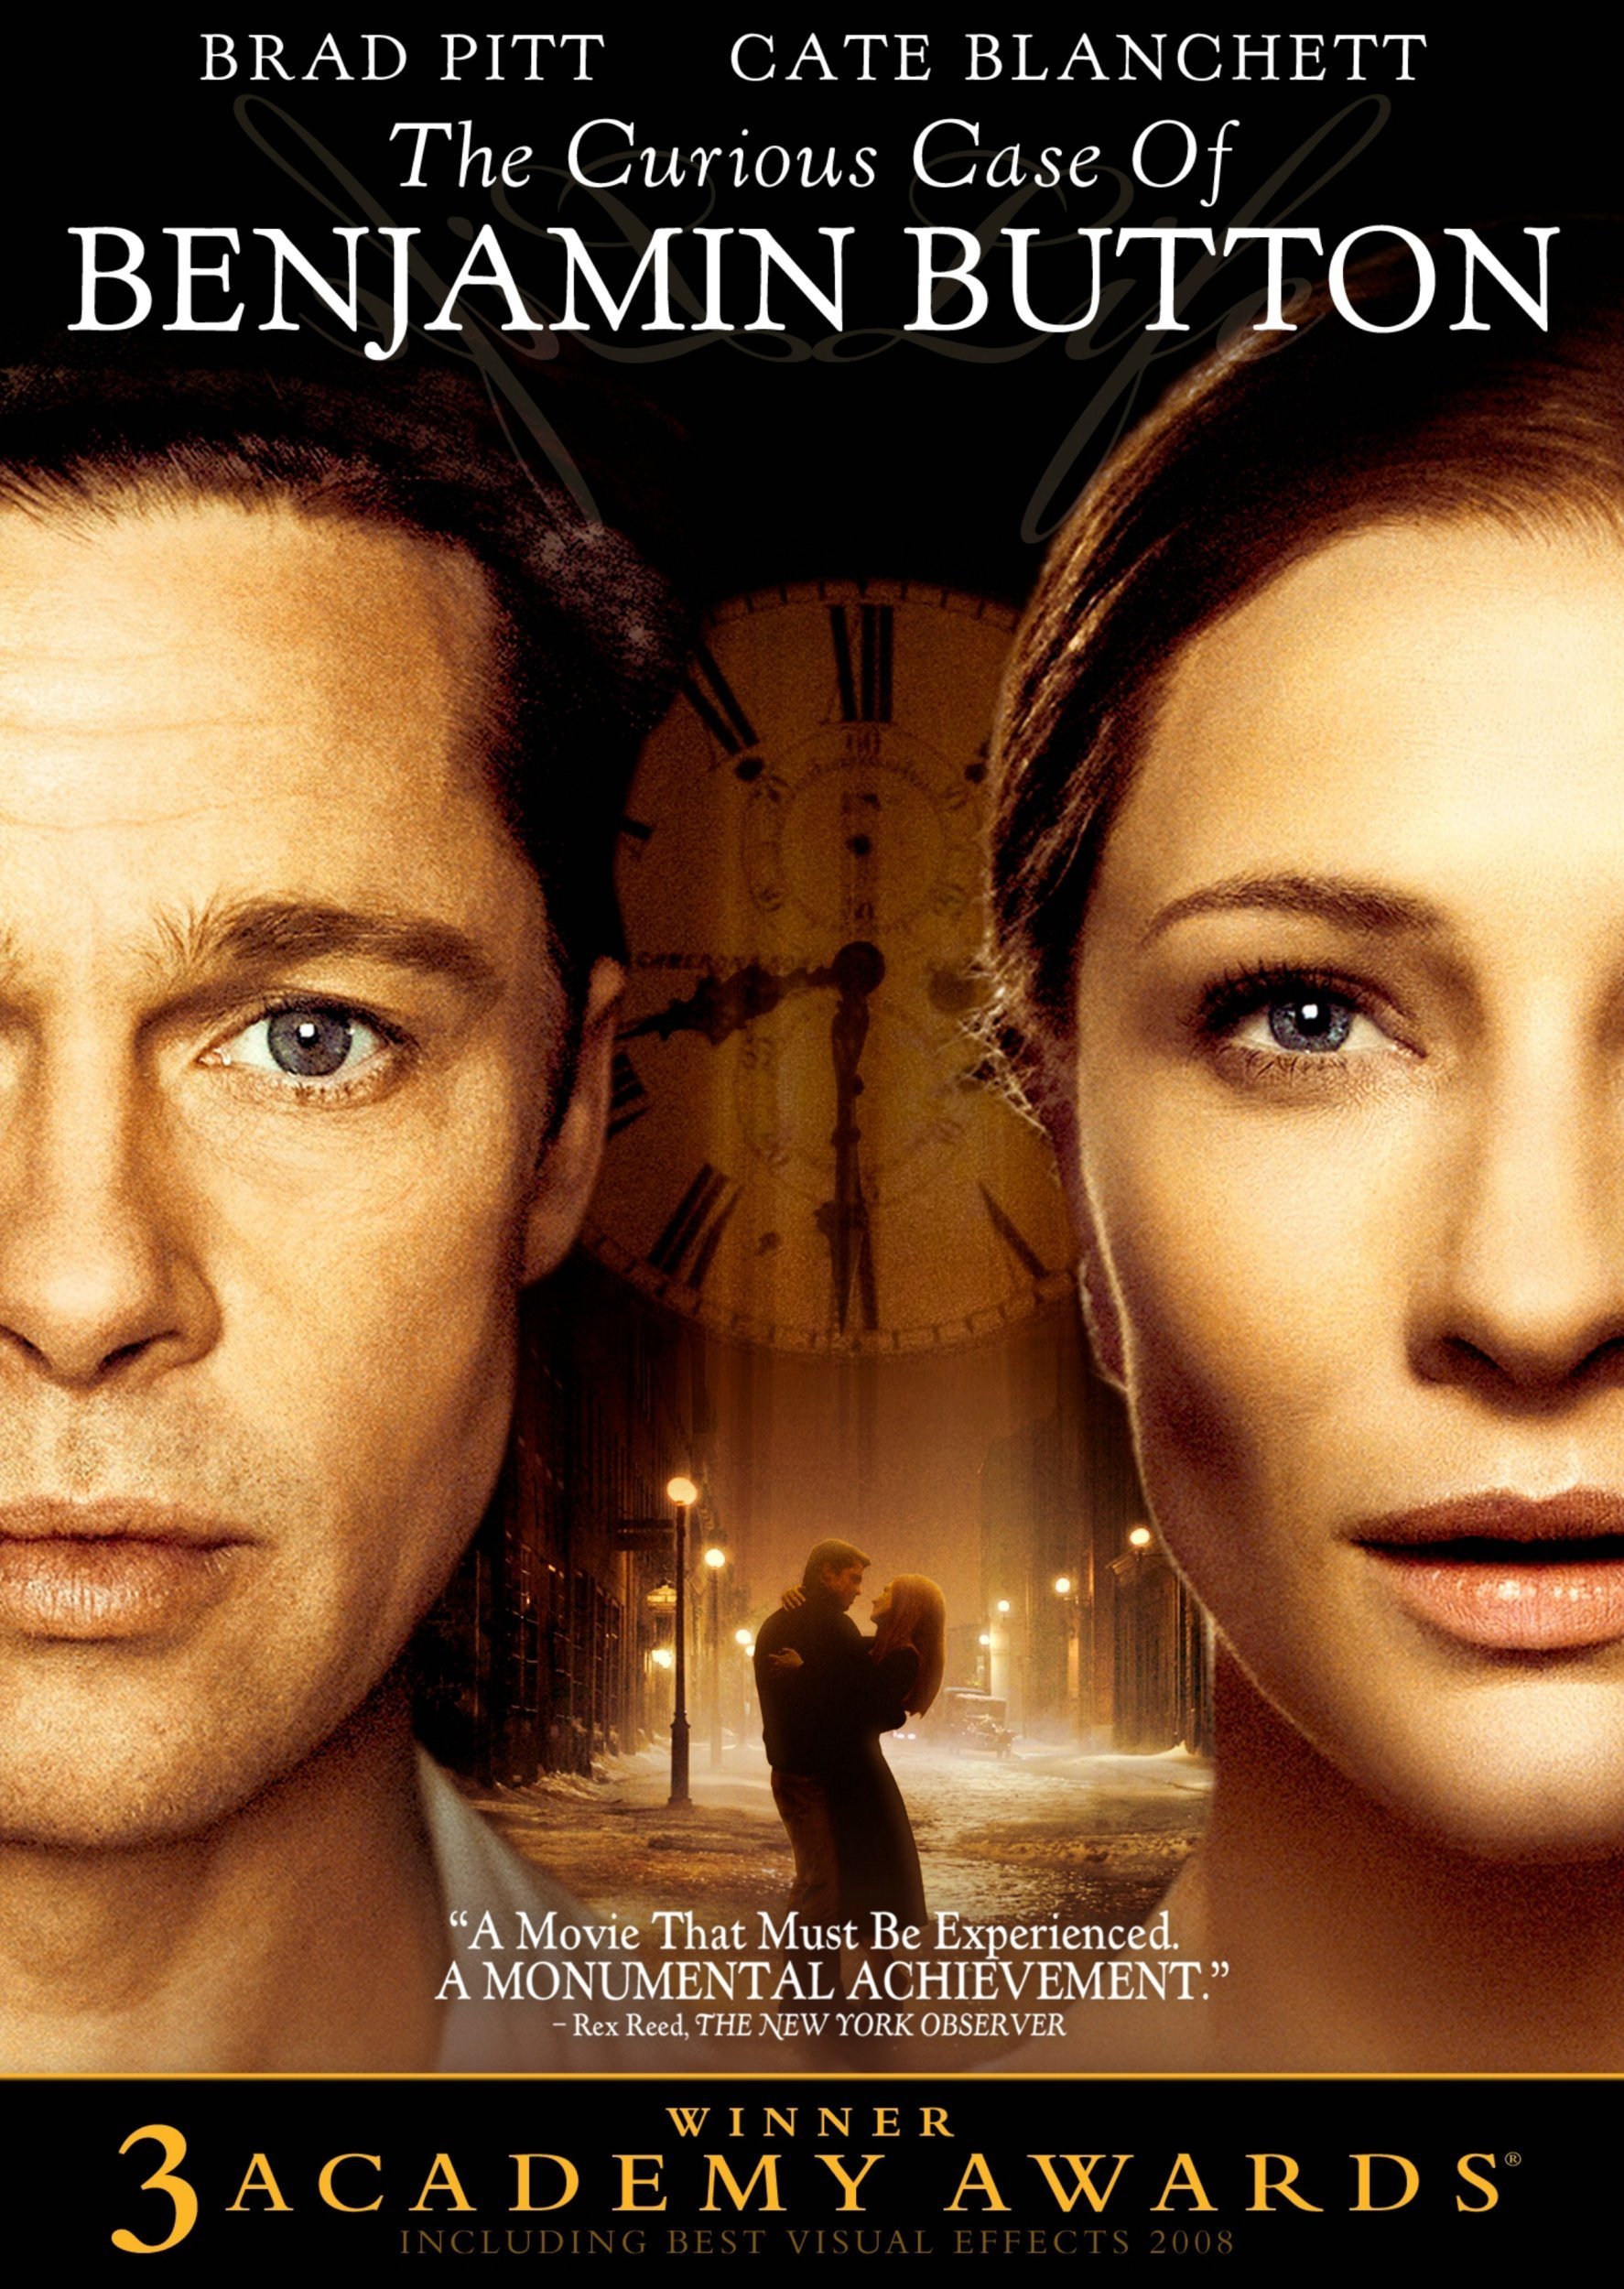 The Curious Case of Benjamin Button DVD Release Date May 5, 2009